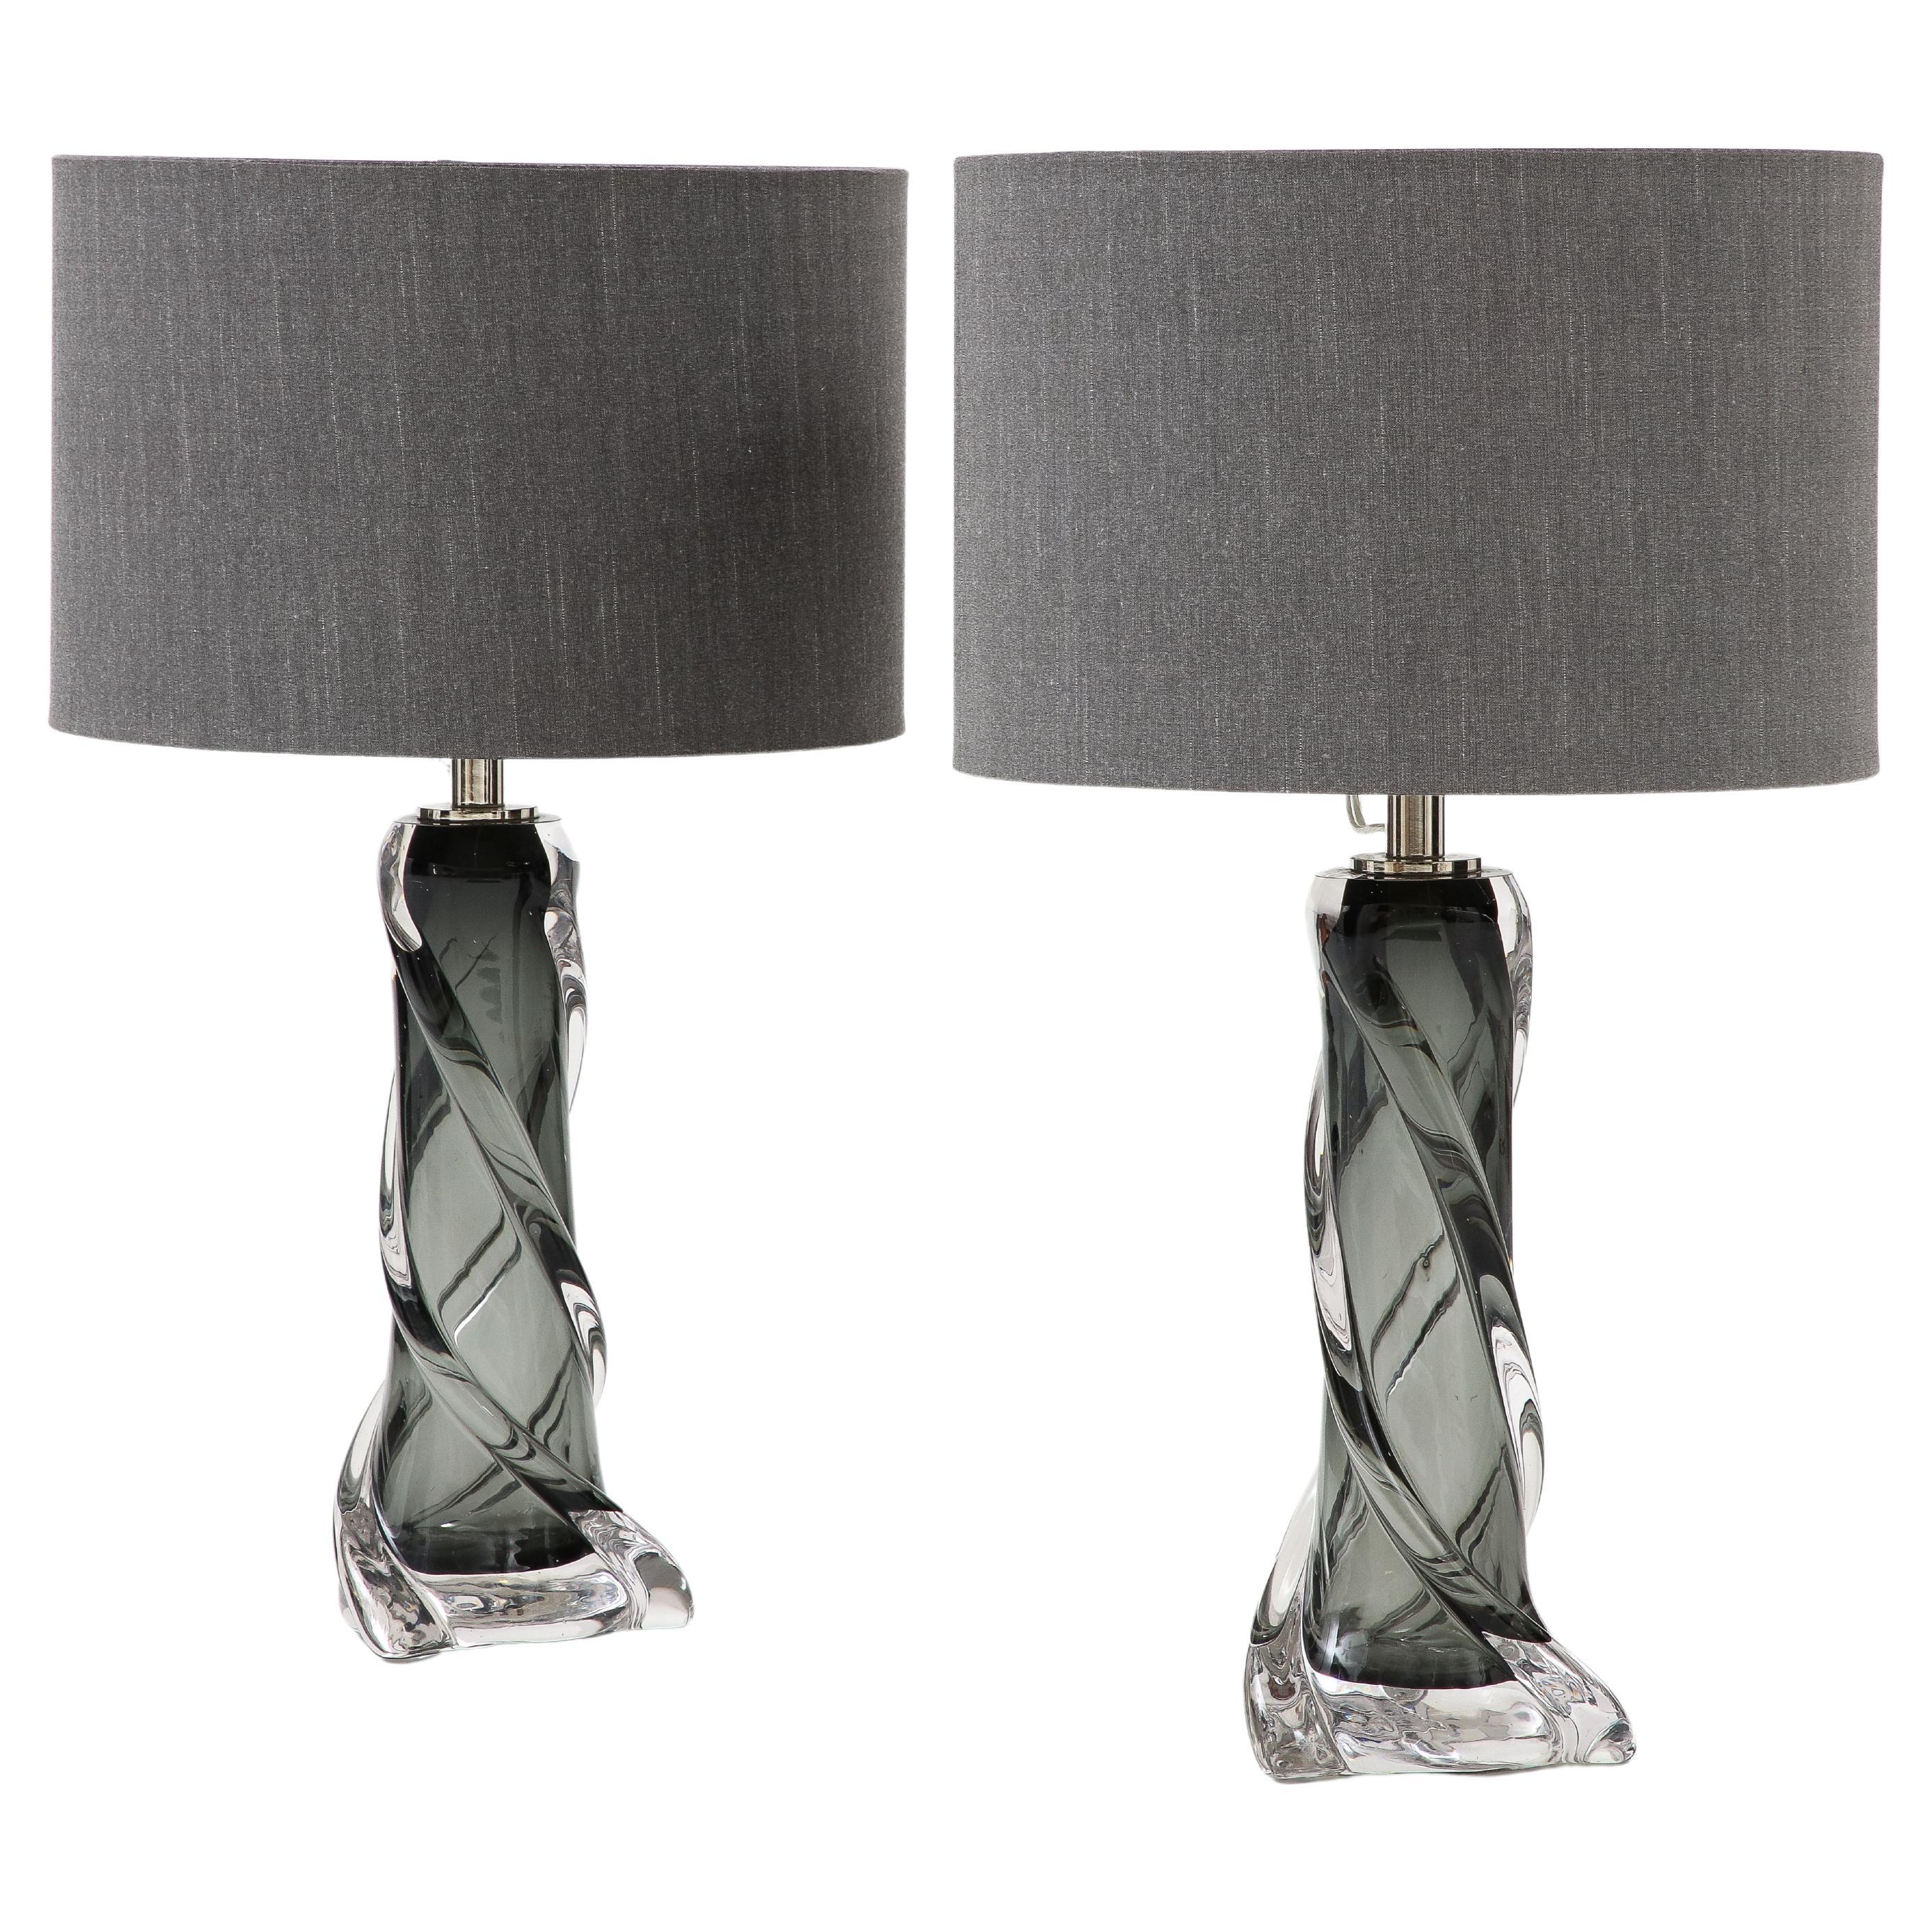 Pair of Gray Murano Twisted Glass Lamps